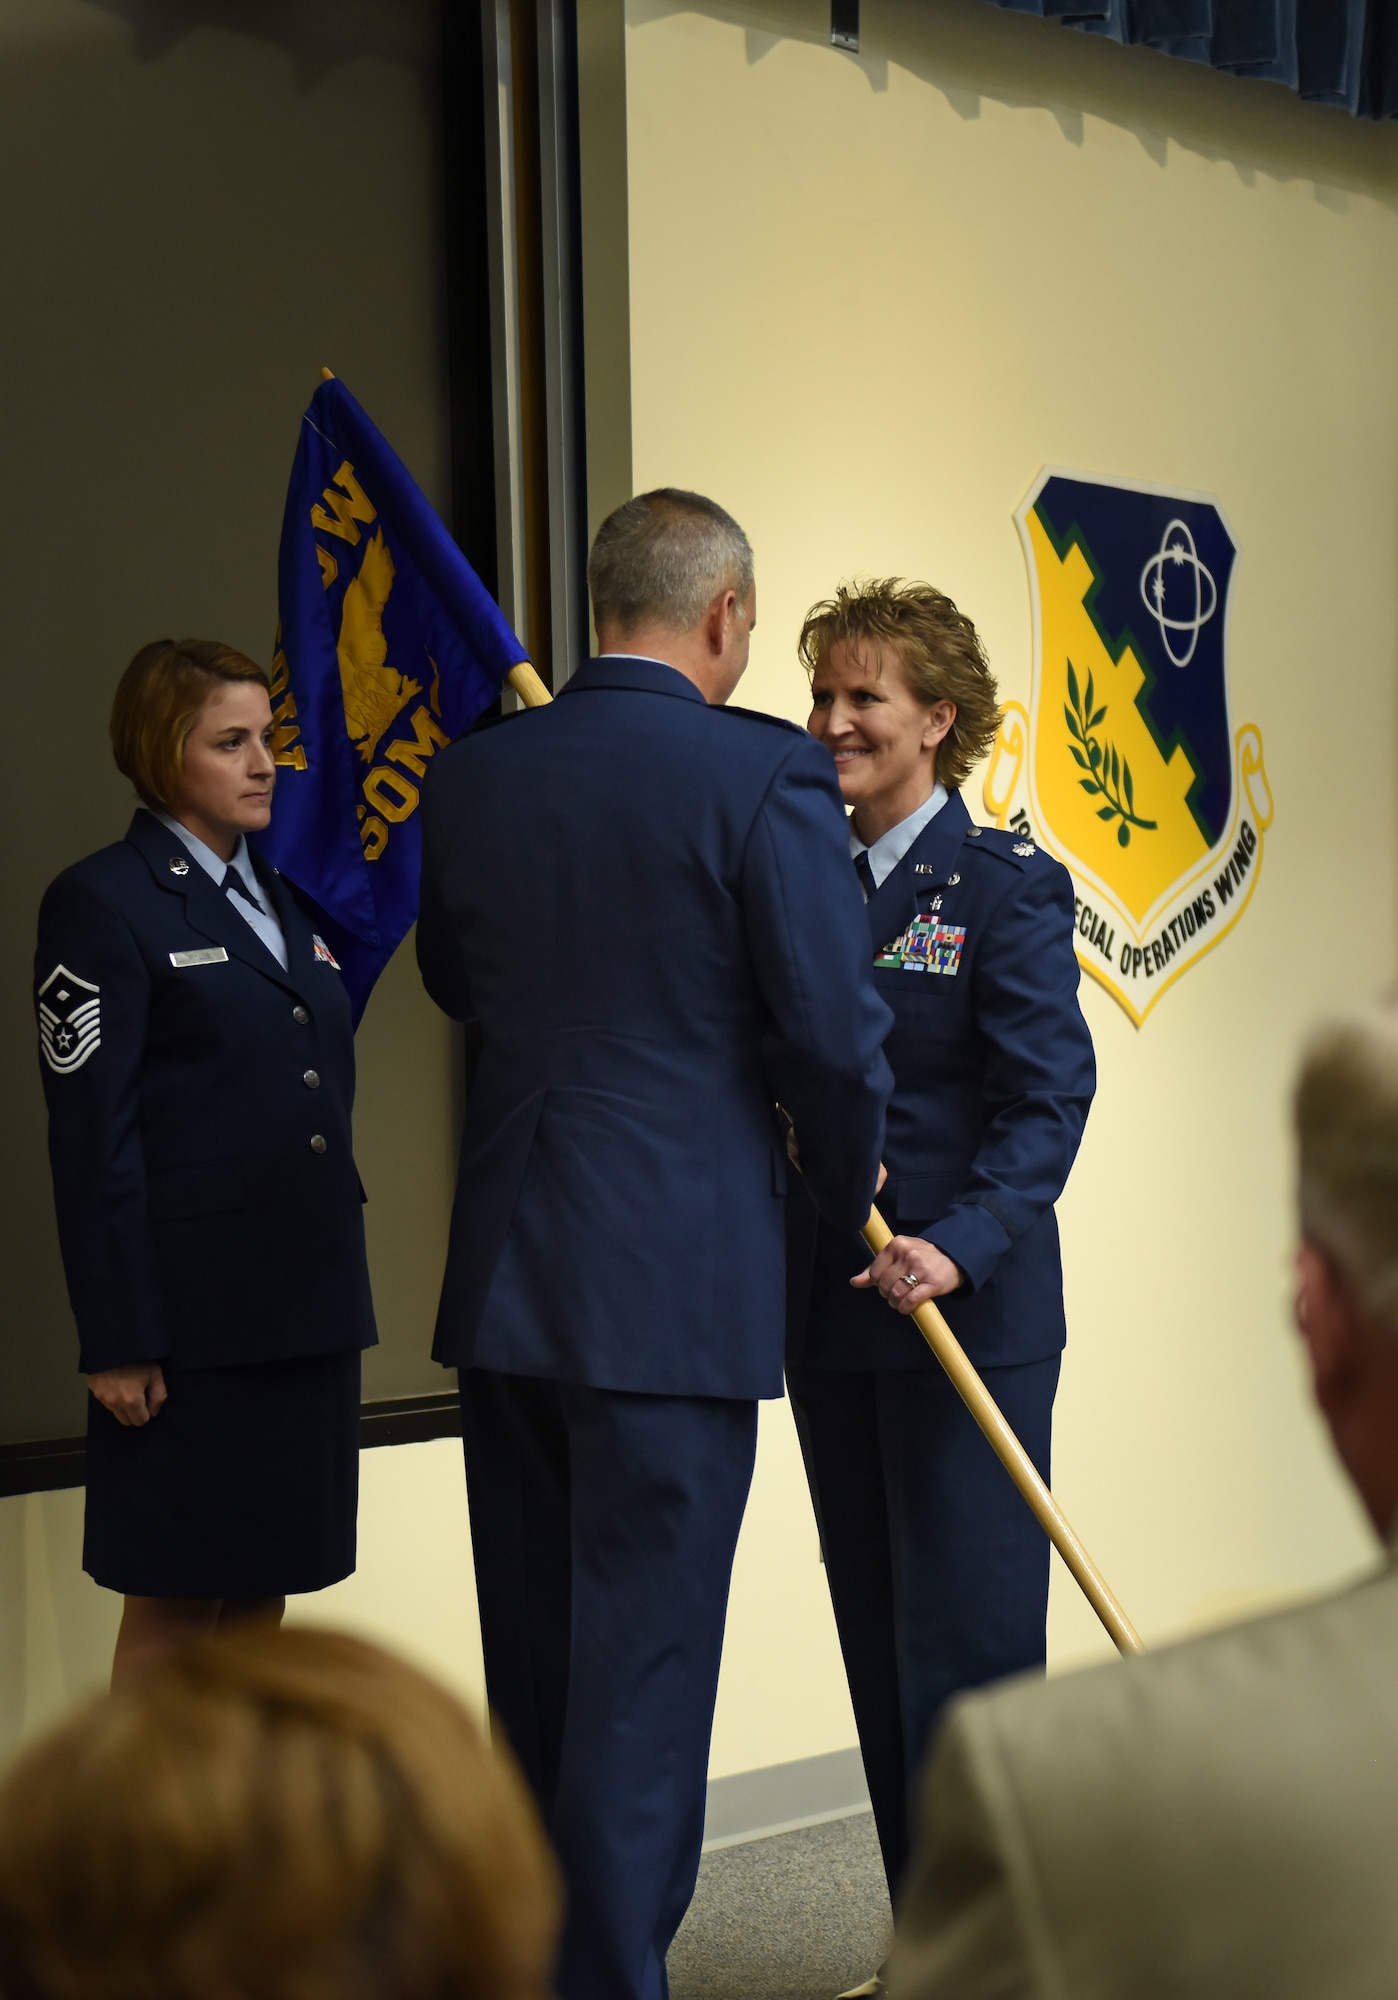 Col. Mike Cason (center), 193rd Special Operations Wing commander, presents the guidon to Lt. Col. Susan Garrett (right), the new 193rd Special Operations Mission Support Group commander, during an assumption of command ceremony Aug. 13, Middletown, Pennsylvania. The ceremony began with preliminary honors and ended with the symbolic passing of the guidon. (U.S. Air National Guard photo by Senior Airman Ethan Carl/Released)